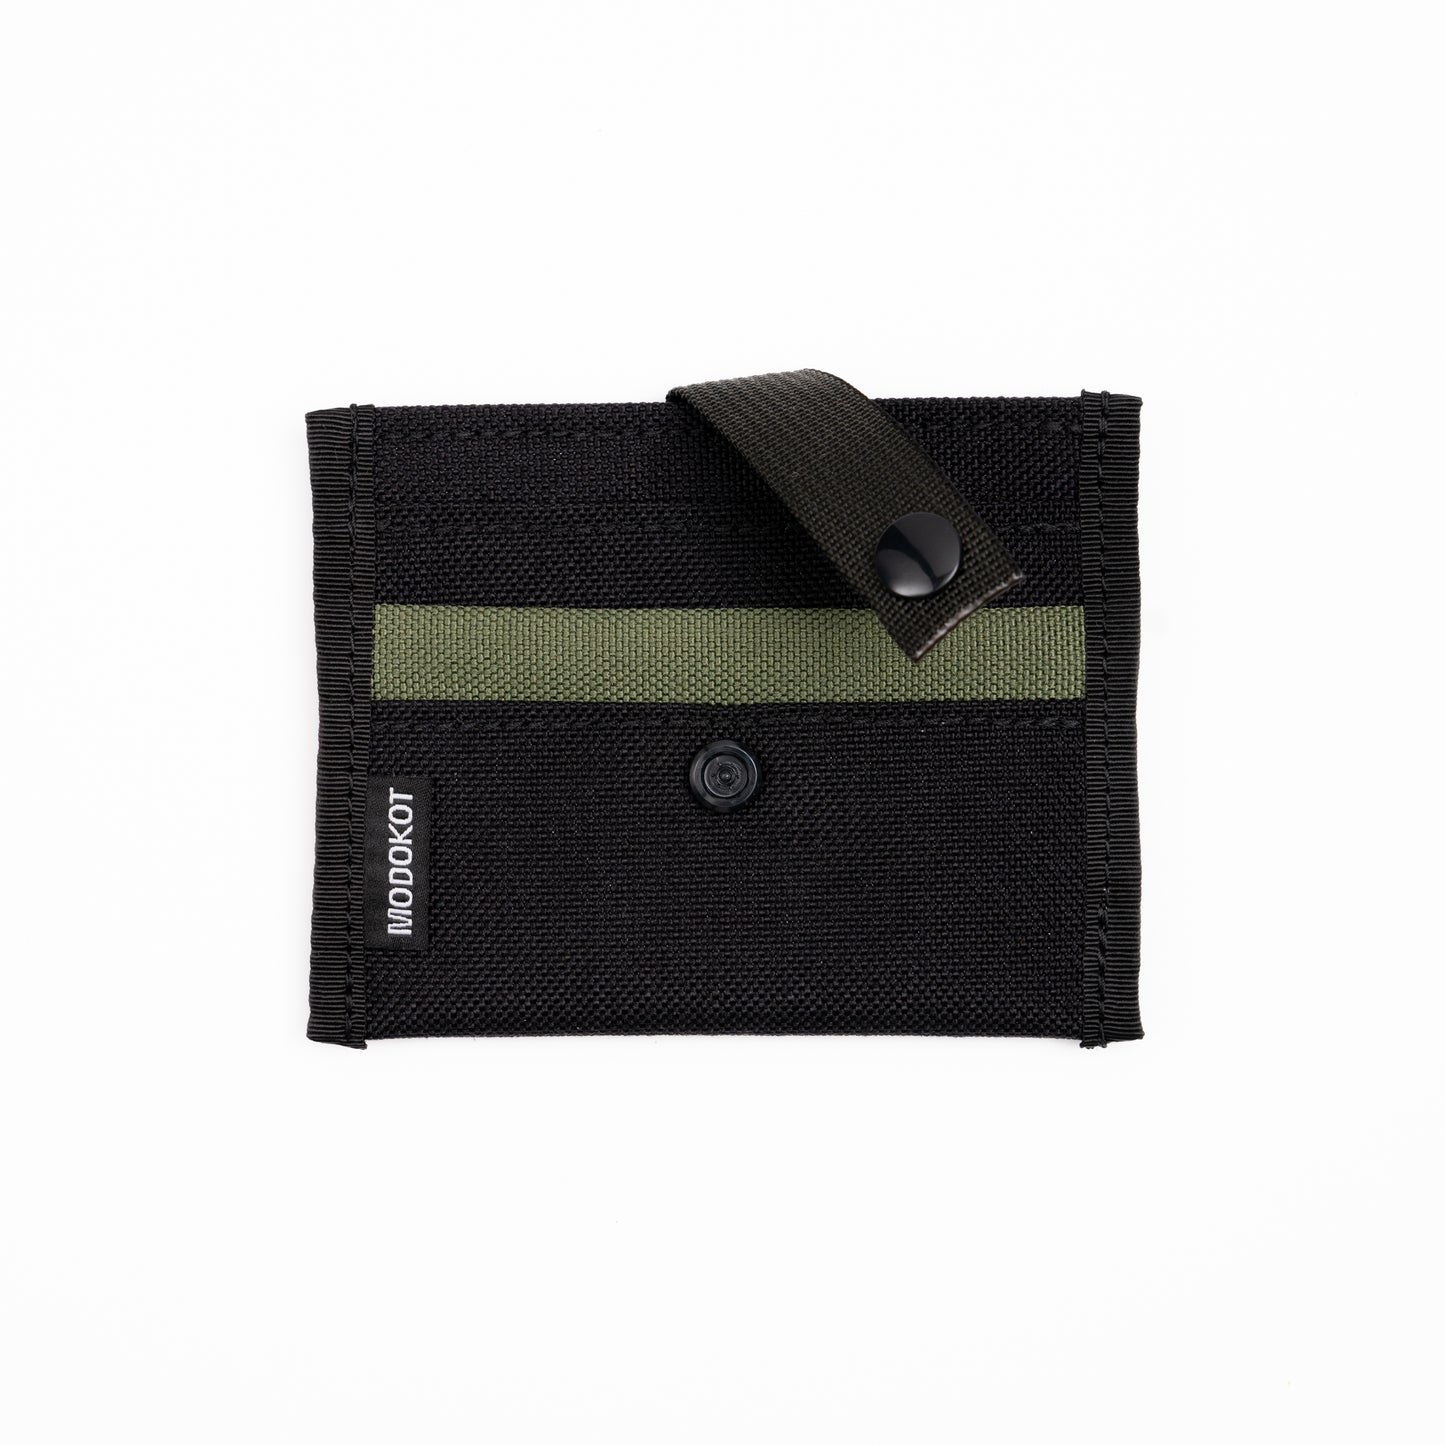 The Slim Wallet - Olive Green